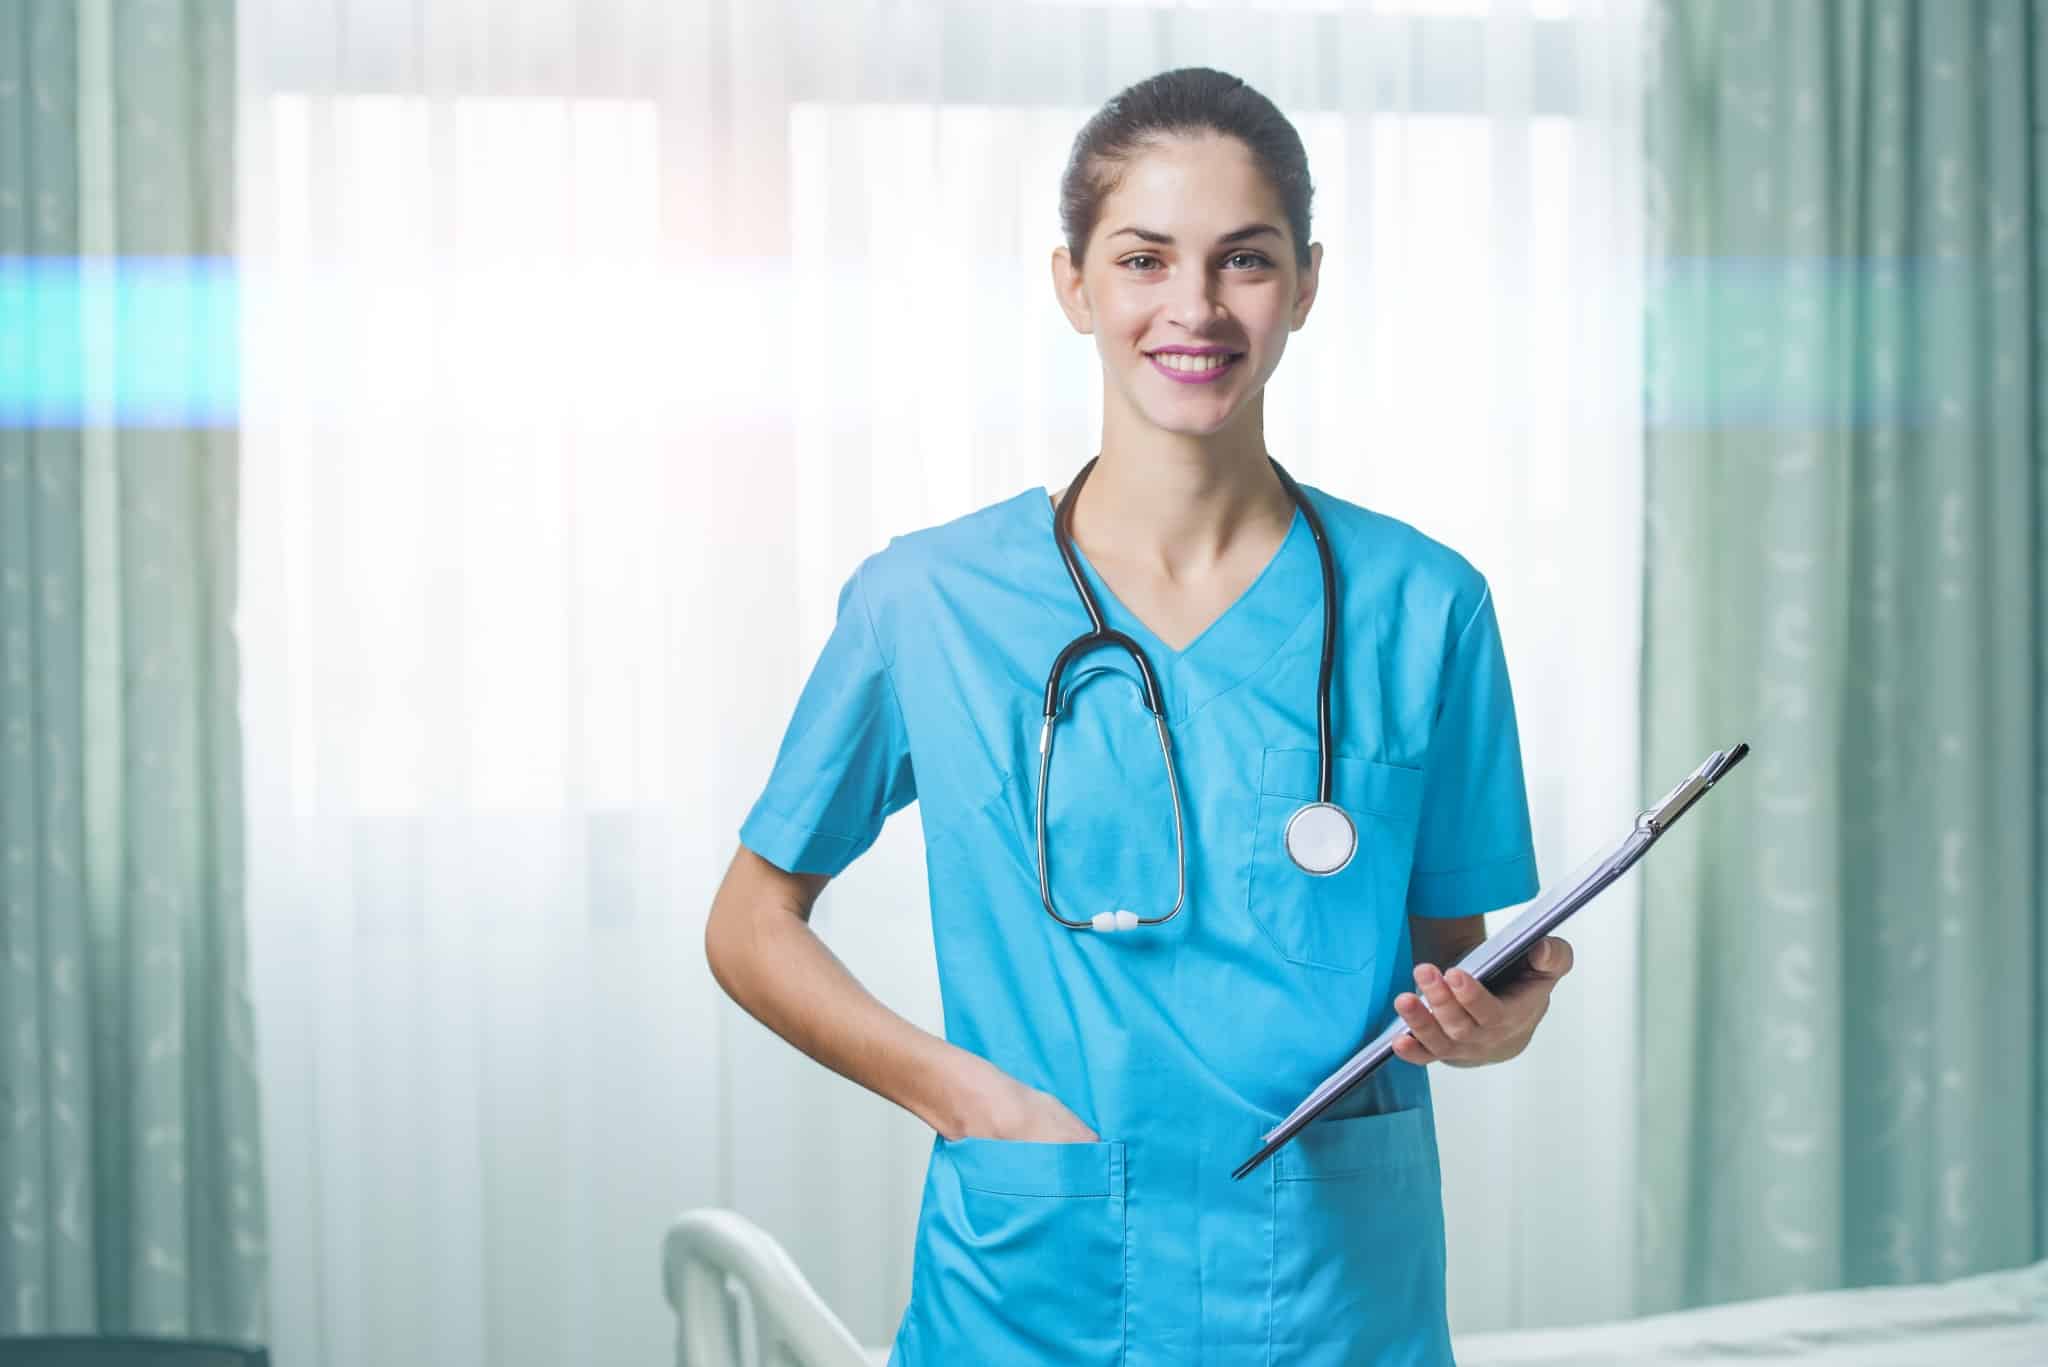 Smiling nurse with a stethoscope and clipboard